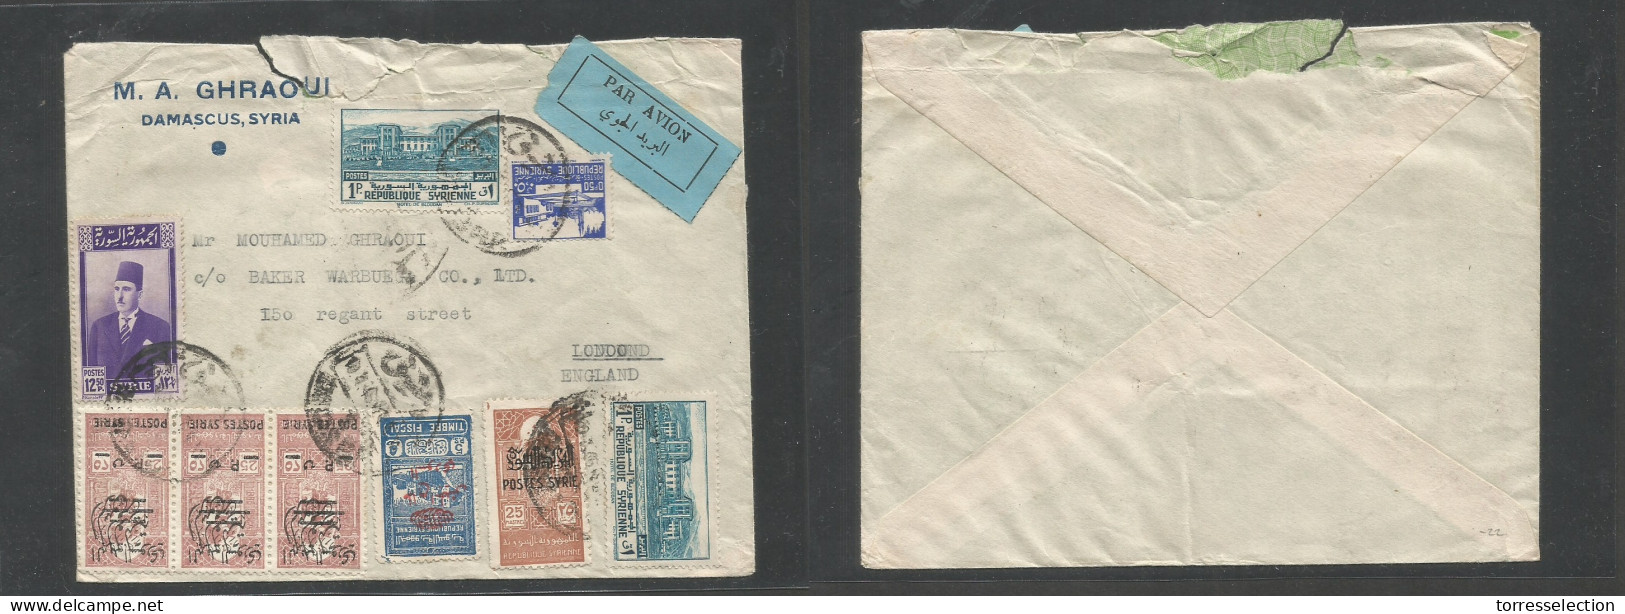 SYRIA. 1946 (10 April) Damasus - London, England. Air Multifkd Env Incl Triple Overprinted Provisional Fiscals Sttamps ( - Syria